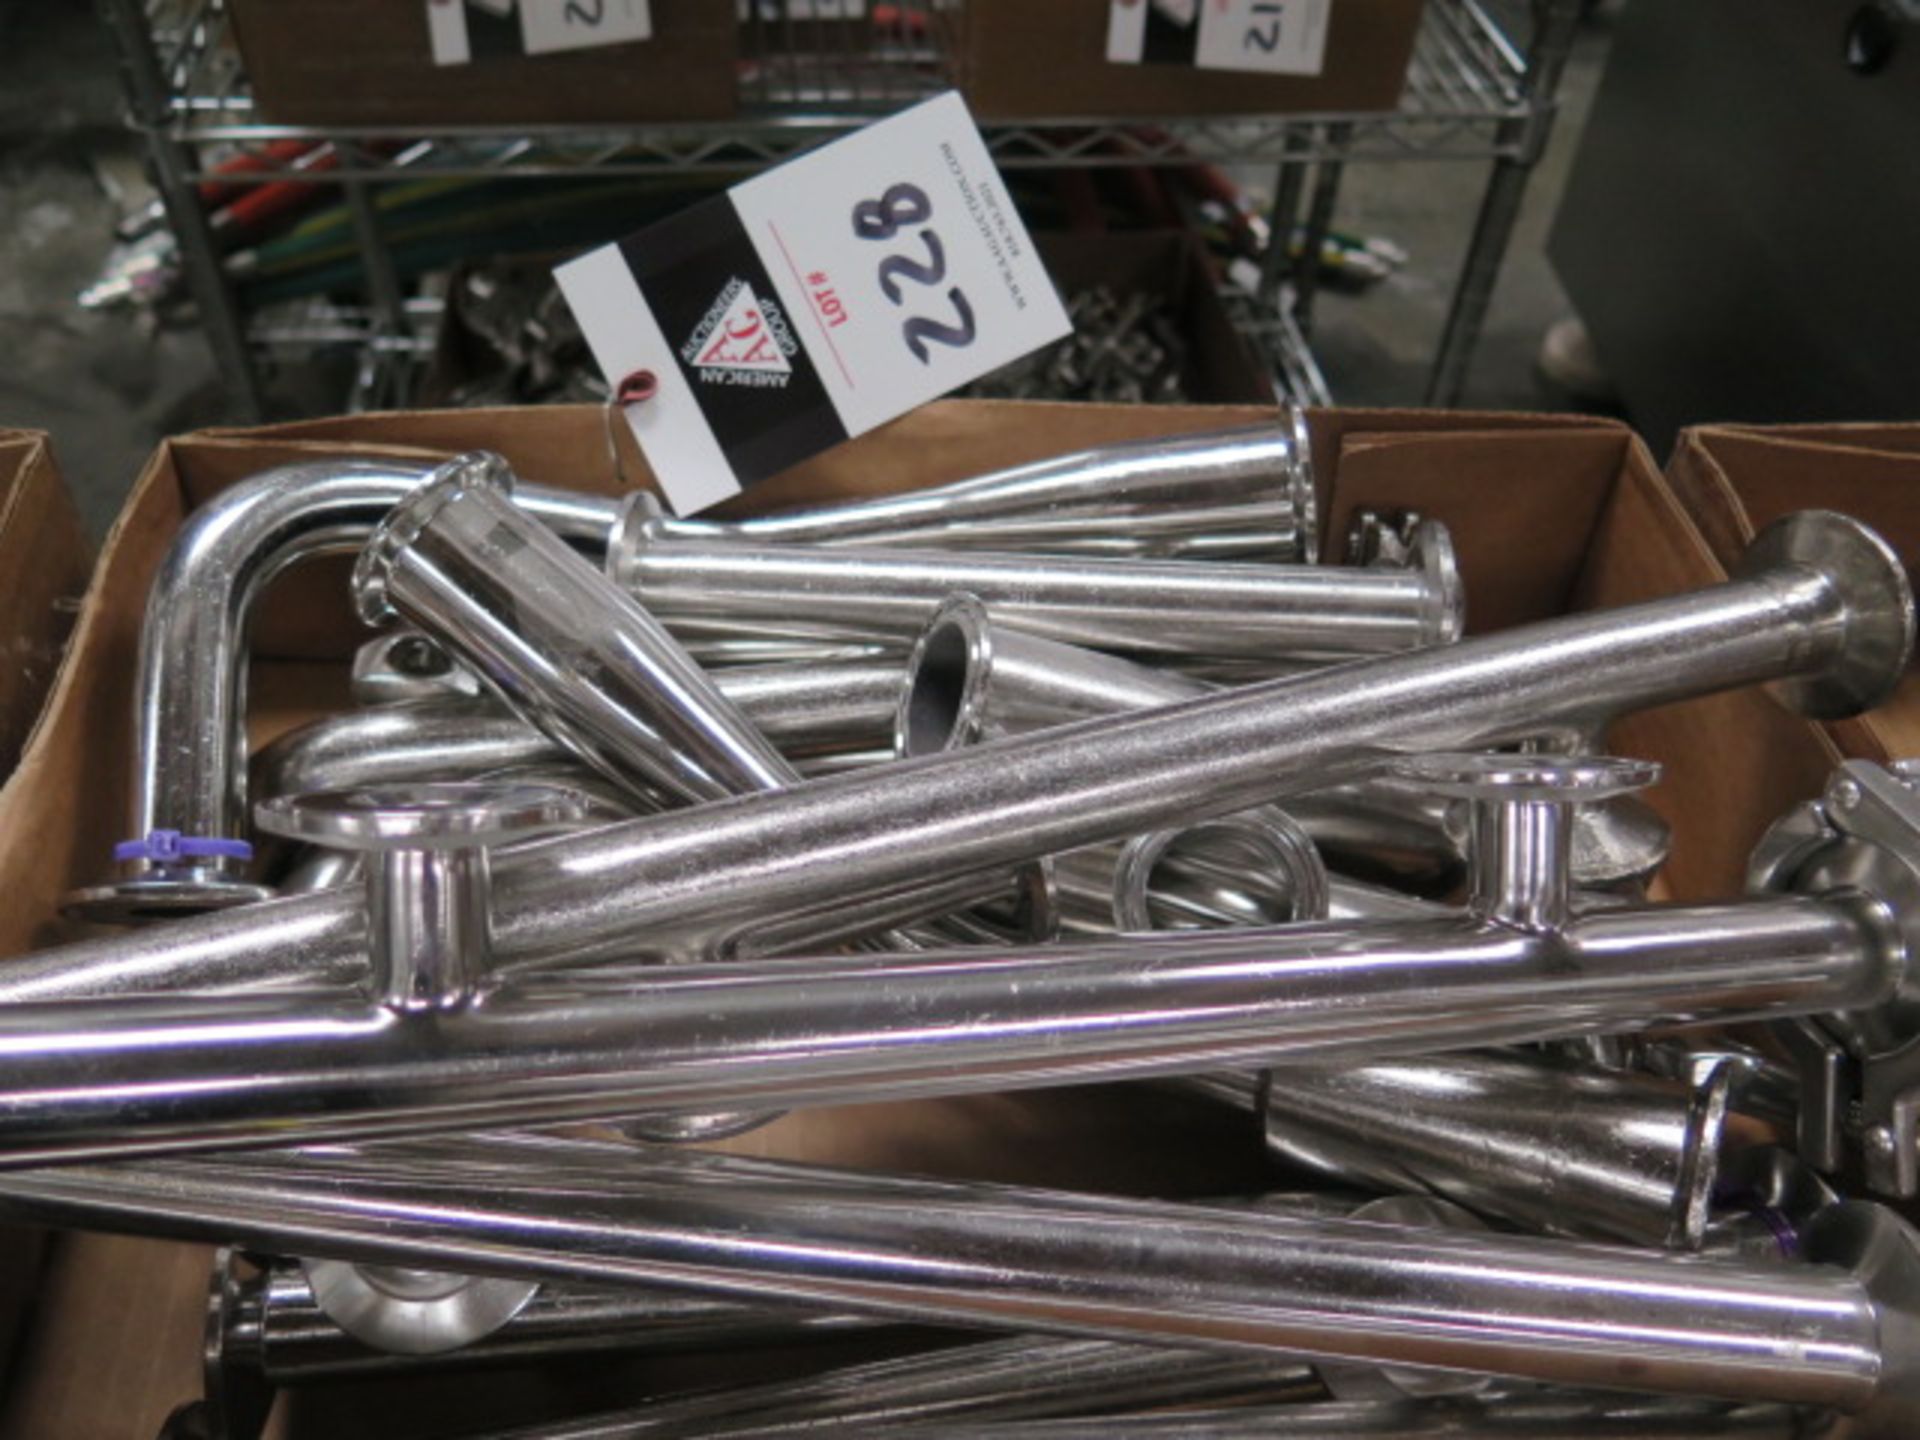 Stainless Steel Components (SOLD AS-IS - NO WARRANTY)